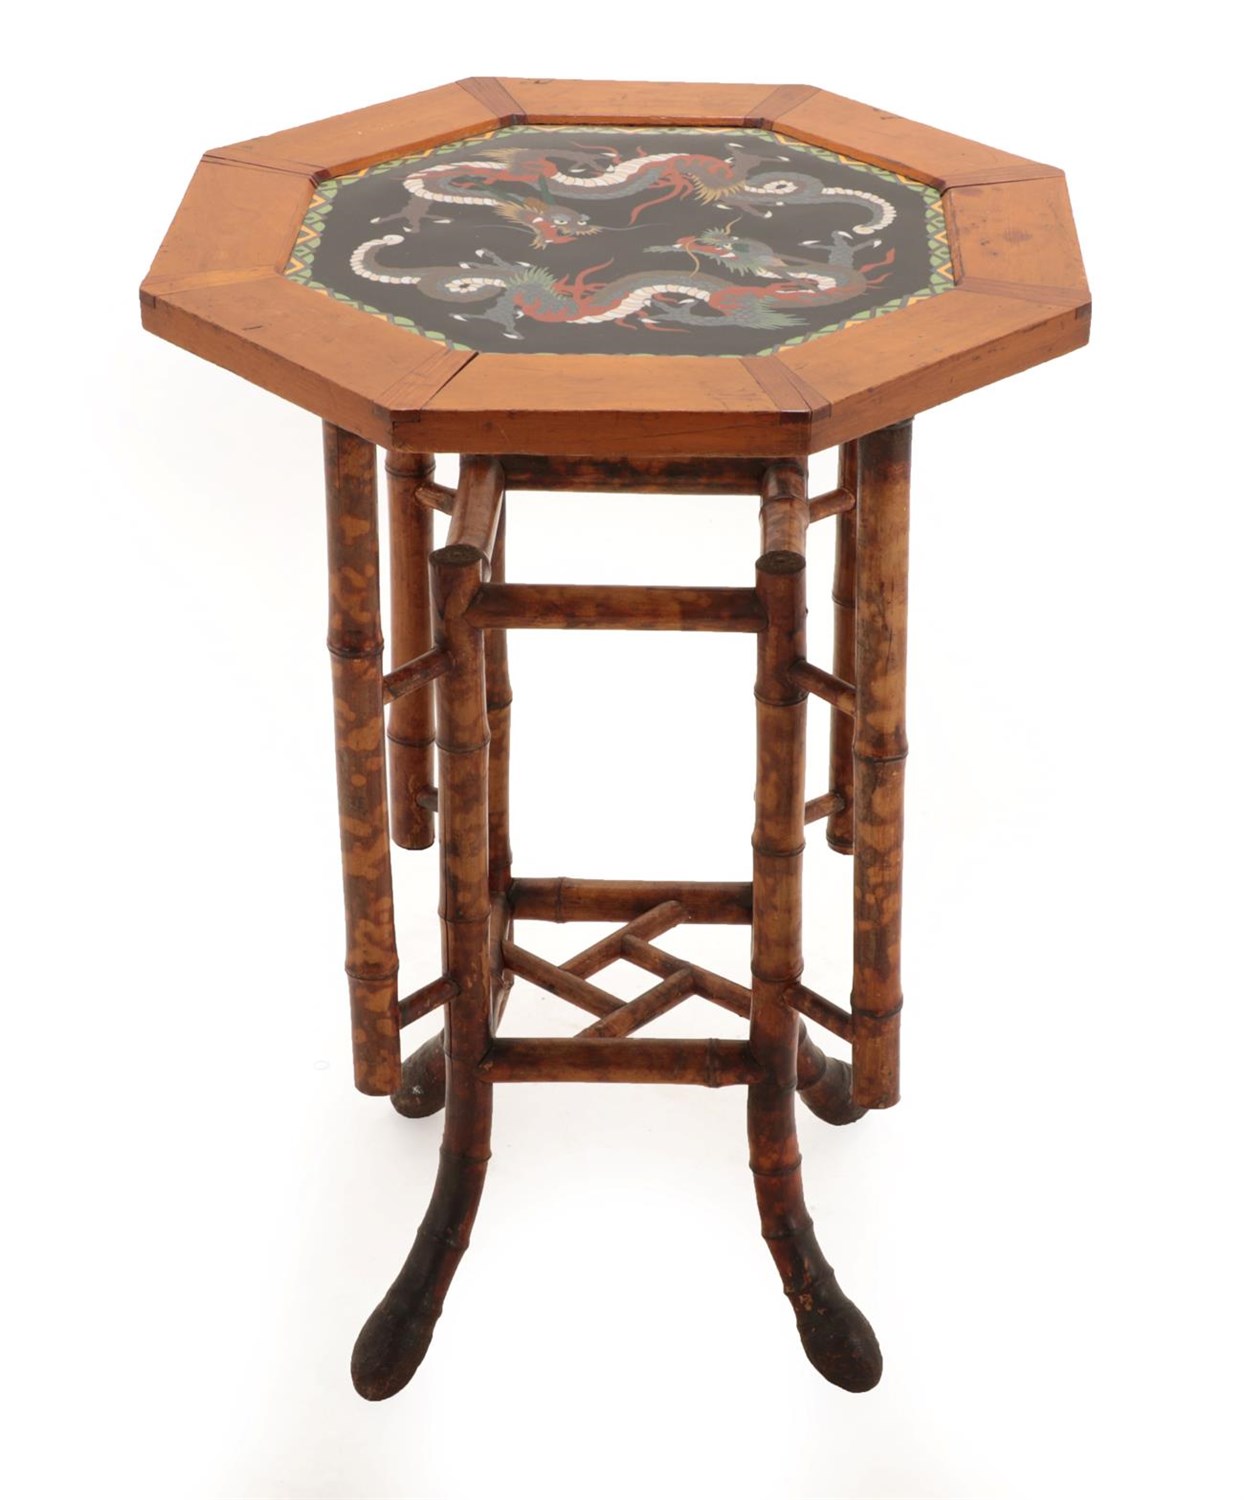 Lot 55 - An Anglo-Japanese Cloisonné and Occasional Table, circa 1900, the octagonal top with inset...